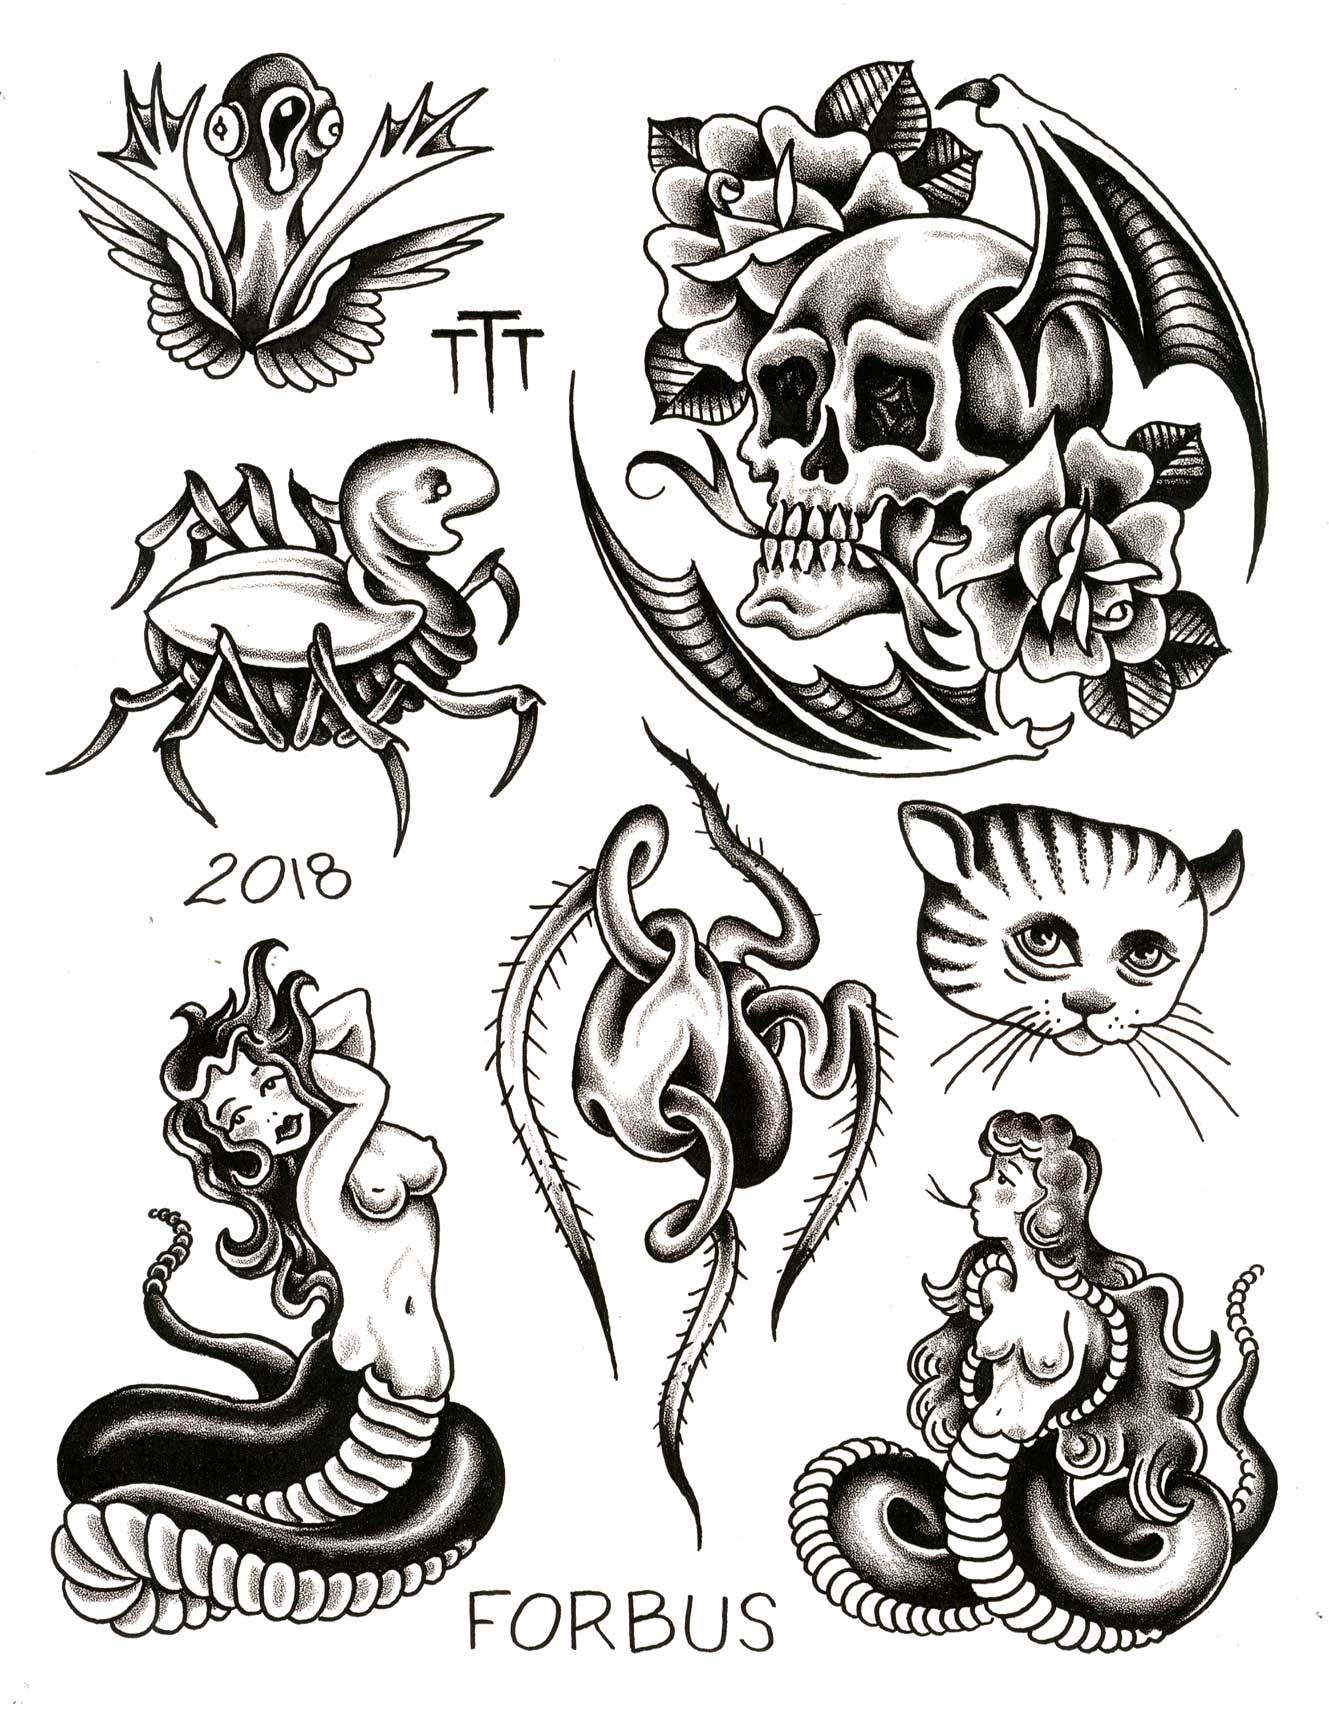 24221 Traditional American Tattoo Images Stock Photos  Vectors   Shutterstock